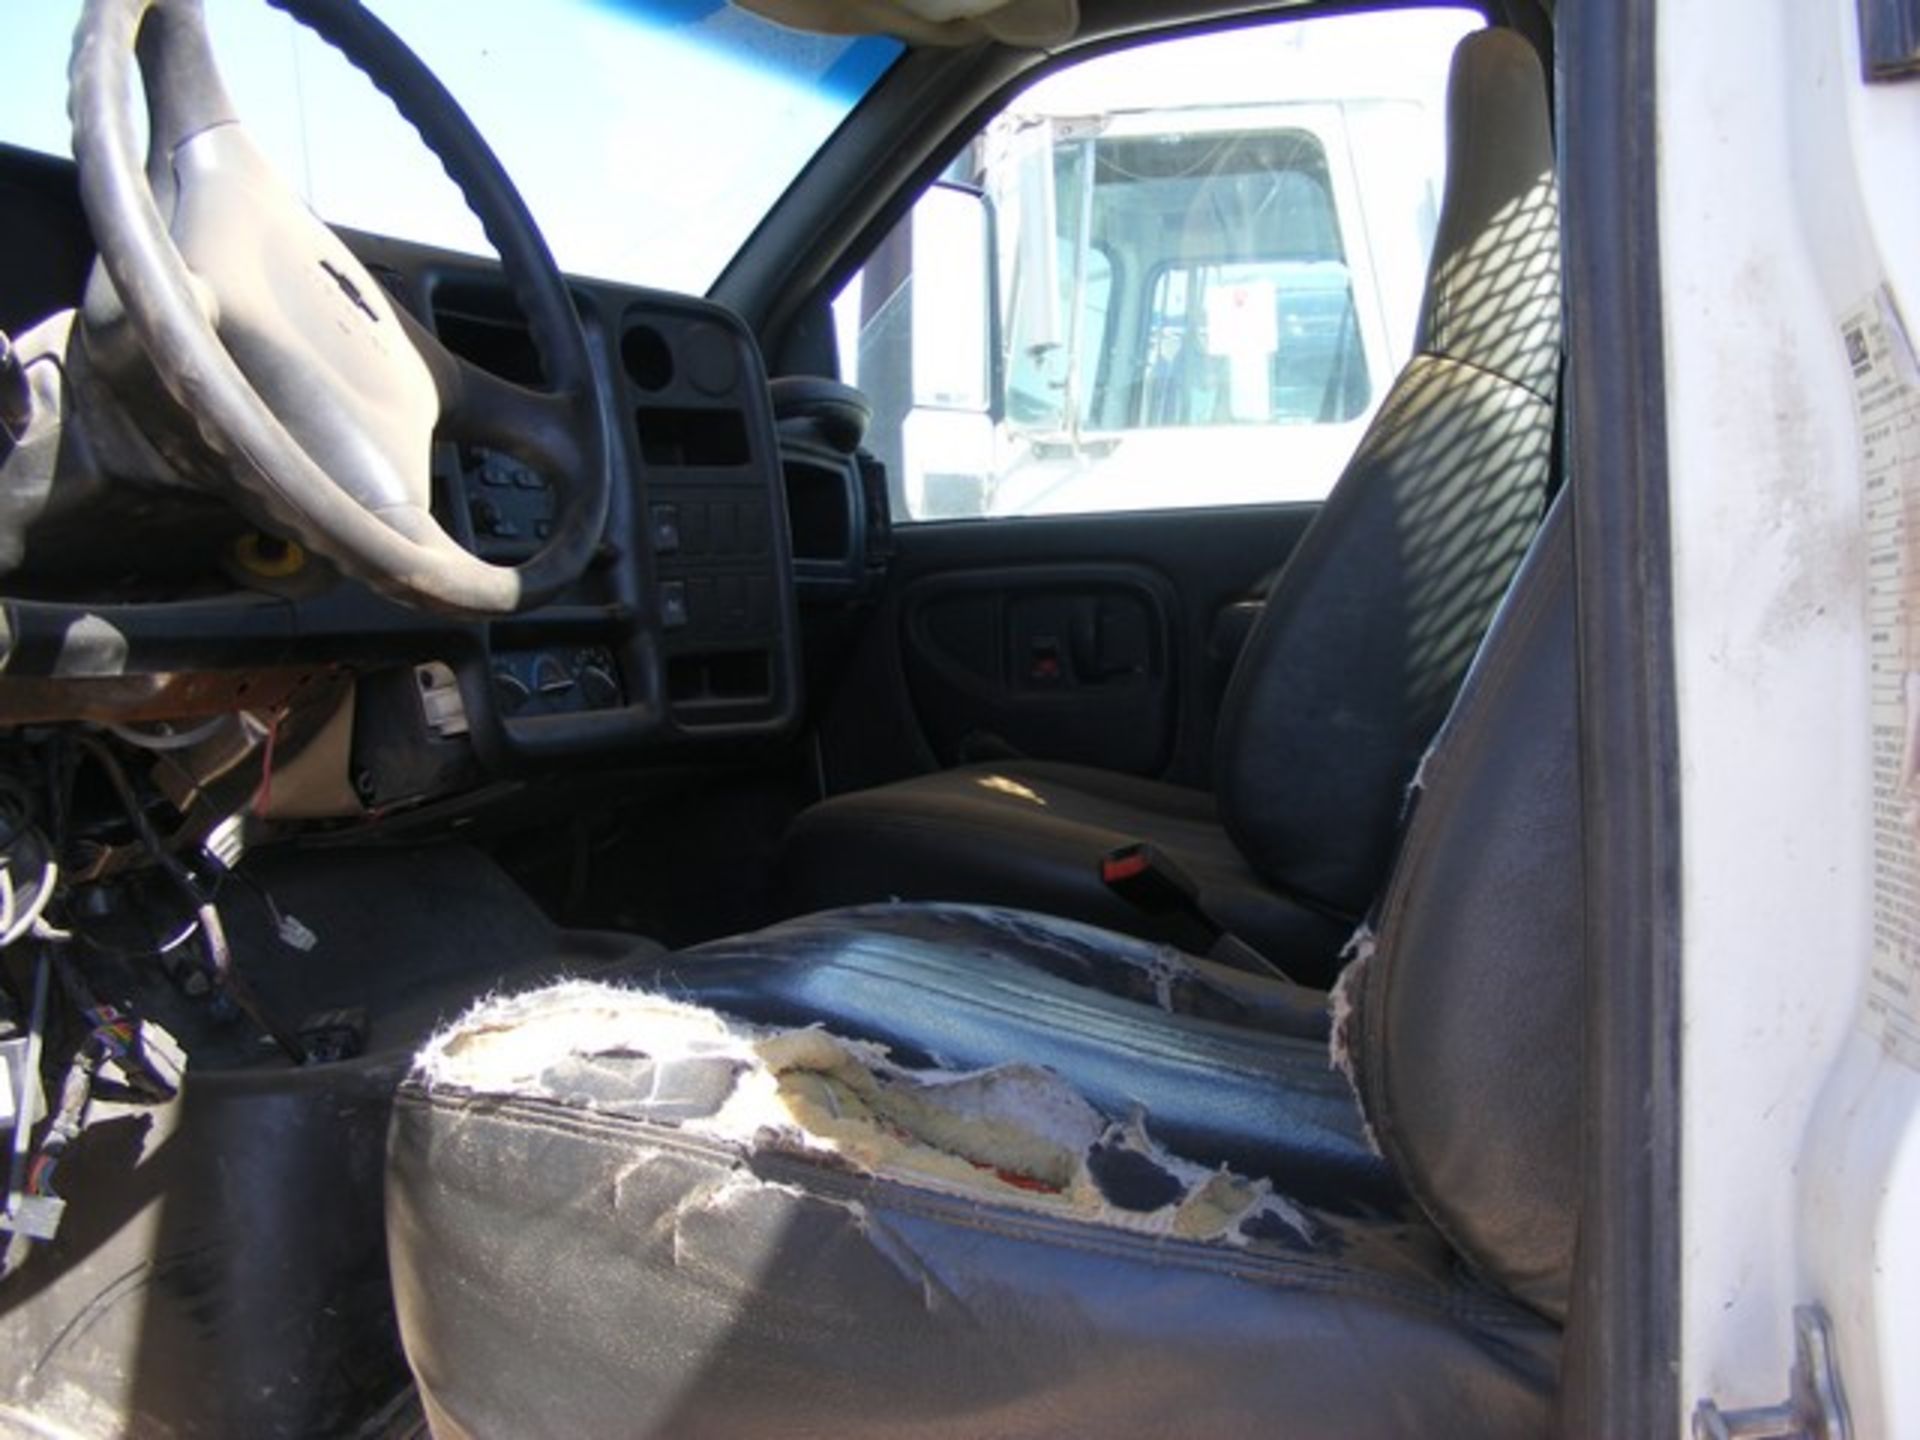 Located in YARD 1 - Midland, TX (2395) (X) 2006 CHEVROLET C7500 S/A DAY CAB STAKE BED TRUCK, VIN- - Image 8 of 10